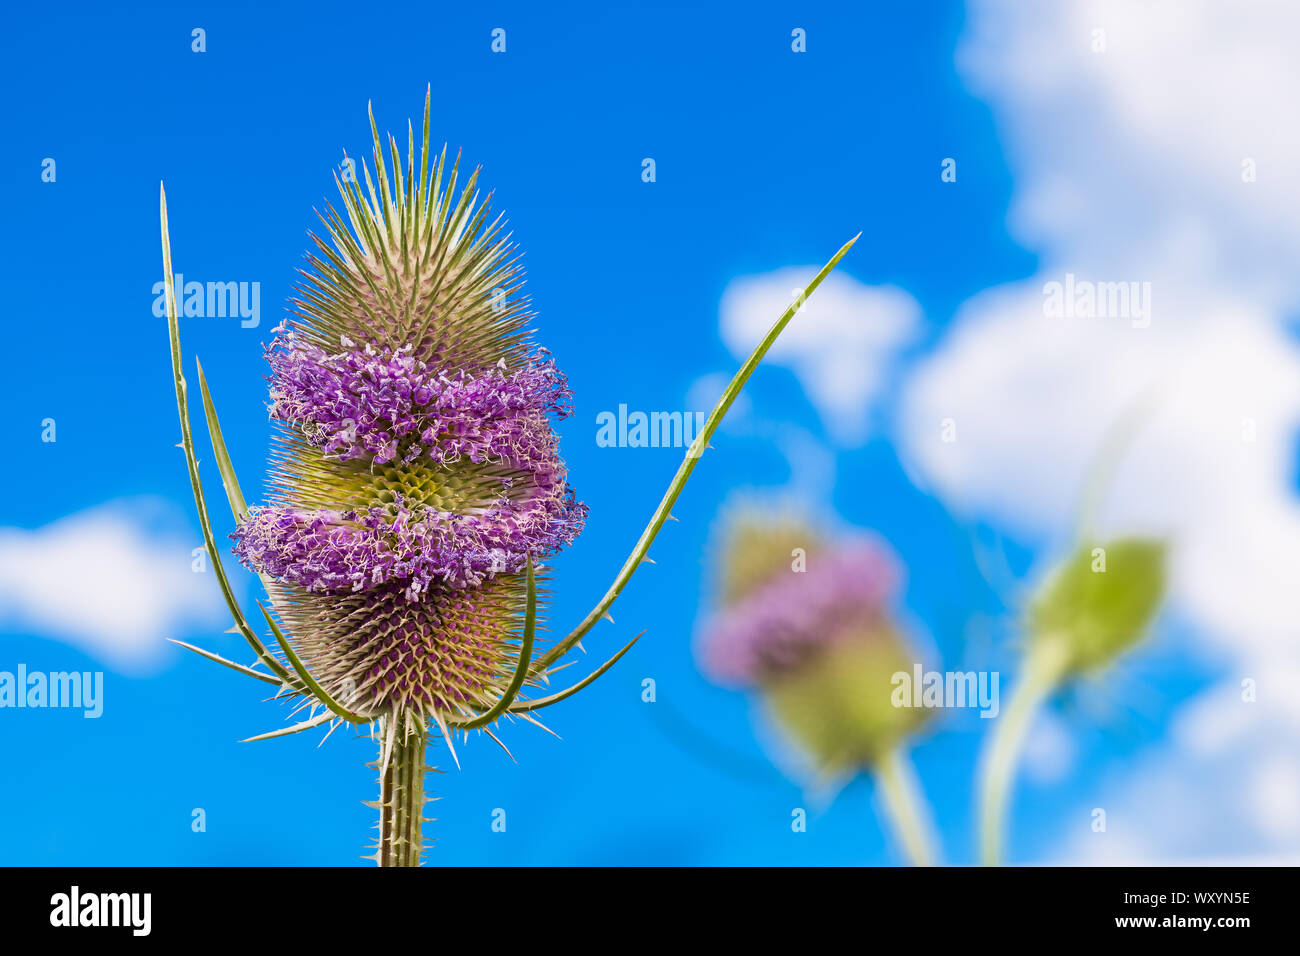 Thorny teasels with pink flowering belts and green spines. Dipsacus. Wild spiky herb on blue sky background. Lyme disease cure in alternative medicine. Stock Photo